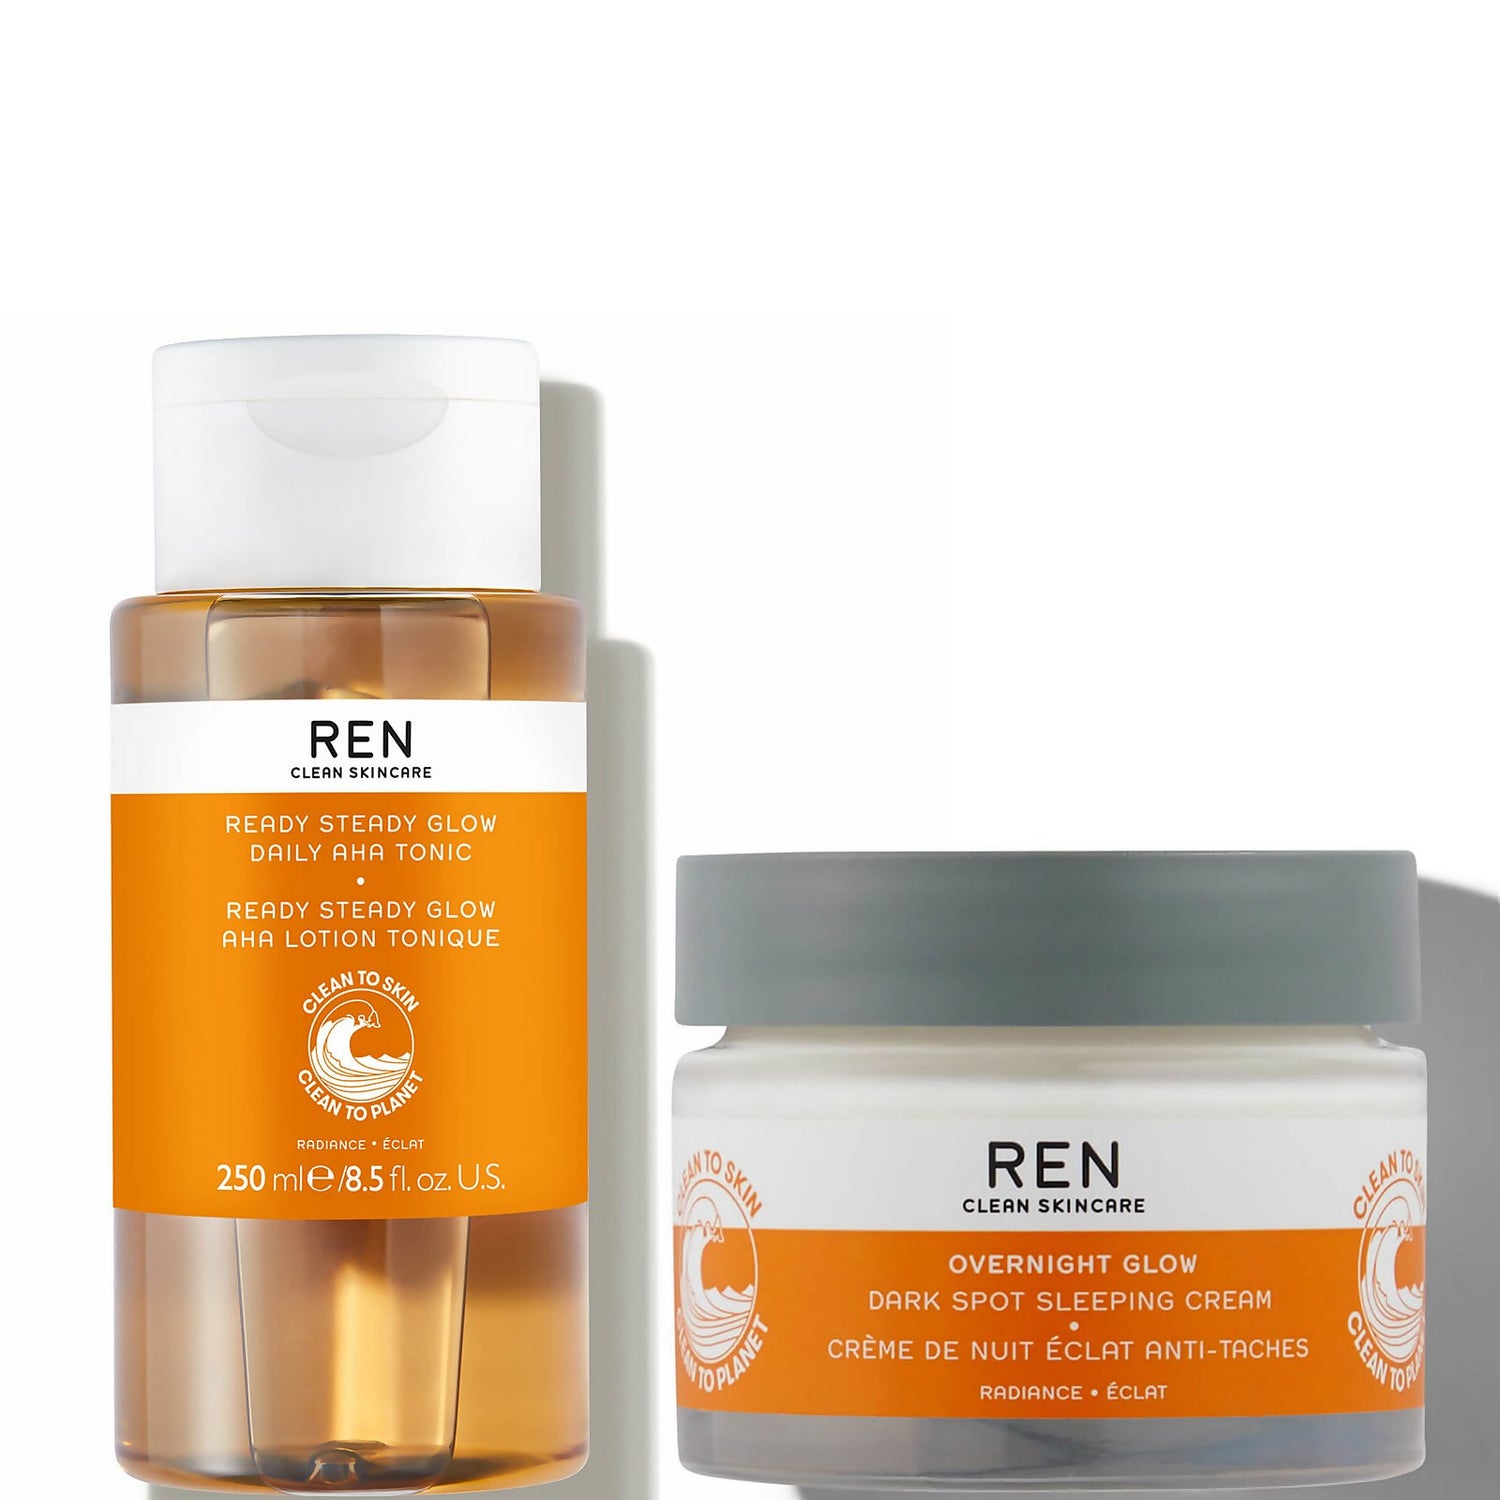 REN Clean Skincare Glowing and Even Skin Night Time Duo